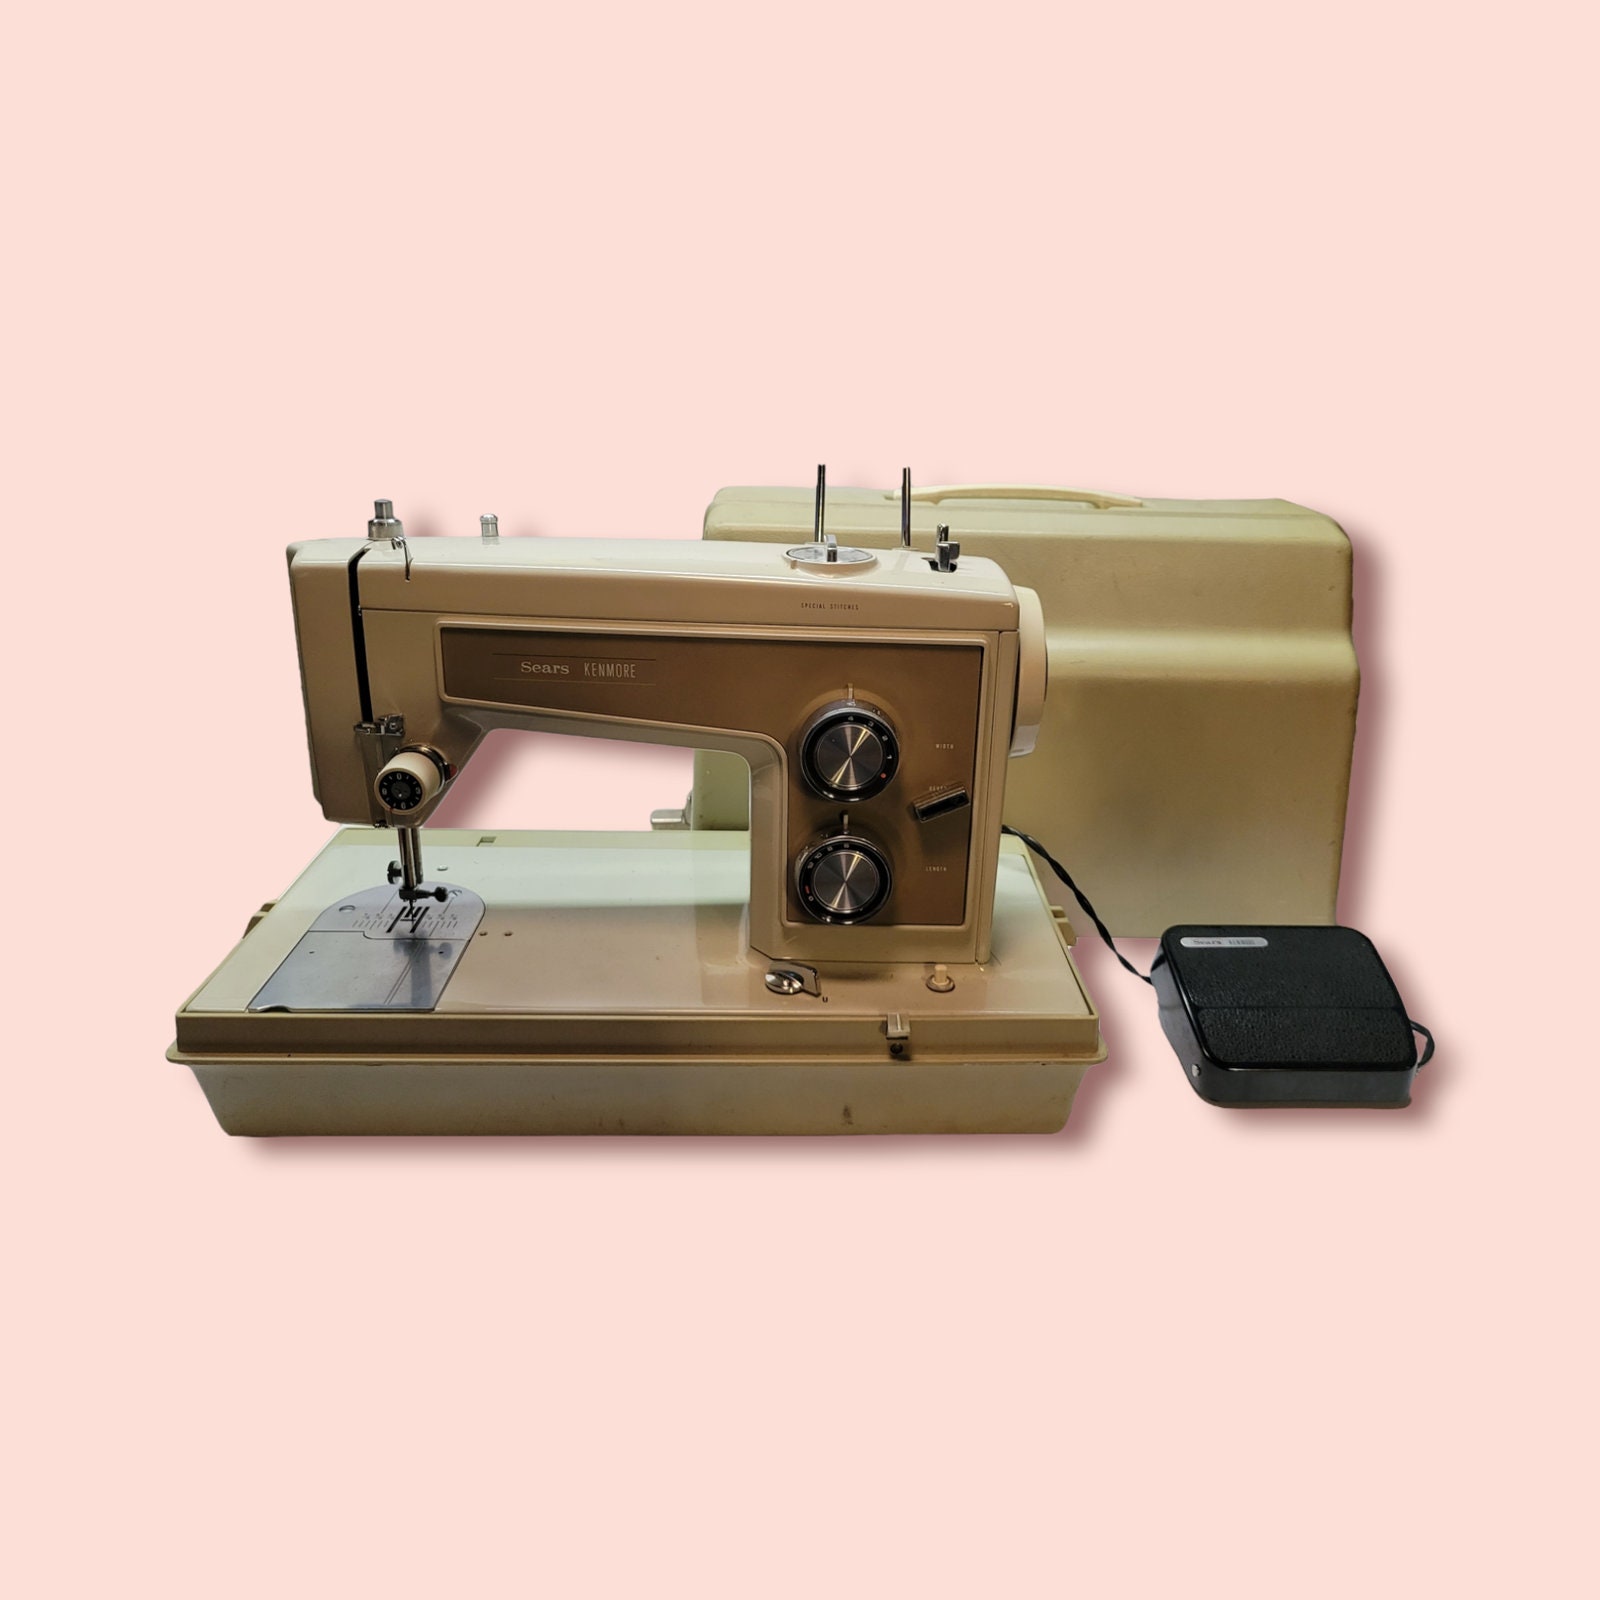 Vintage Sears Kenmore electric portable sewing machine with green